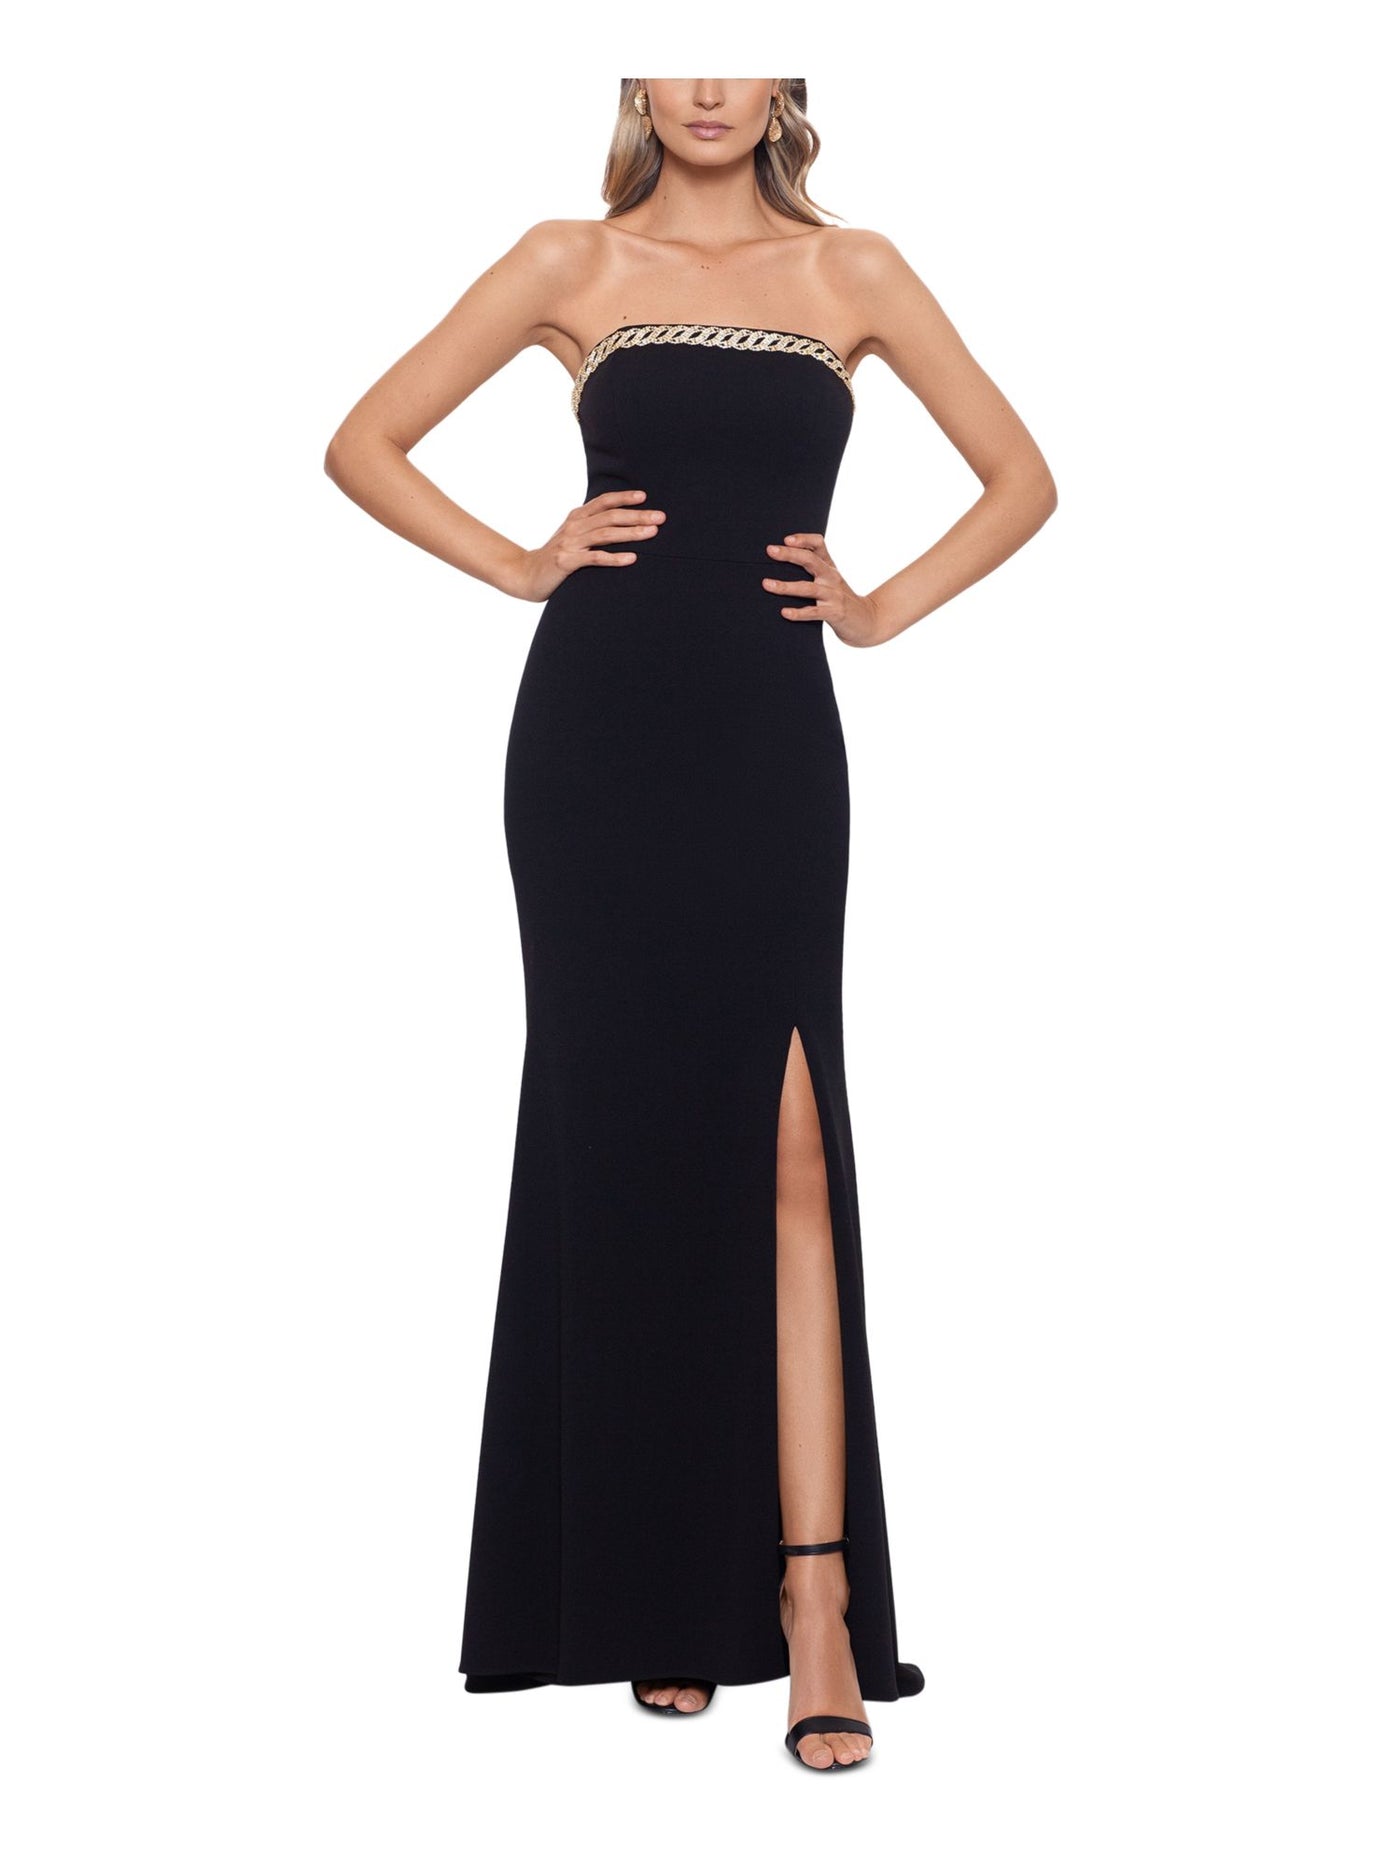 XSCAPE Womens Black Stretch Embellished Zippered Scuba Crepe Slitted Lined Sleeveless Strapless Full-Length Evening Fit + Flare Dress 2